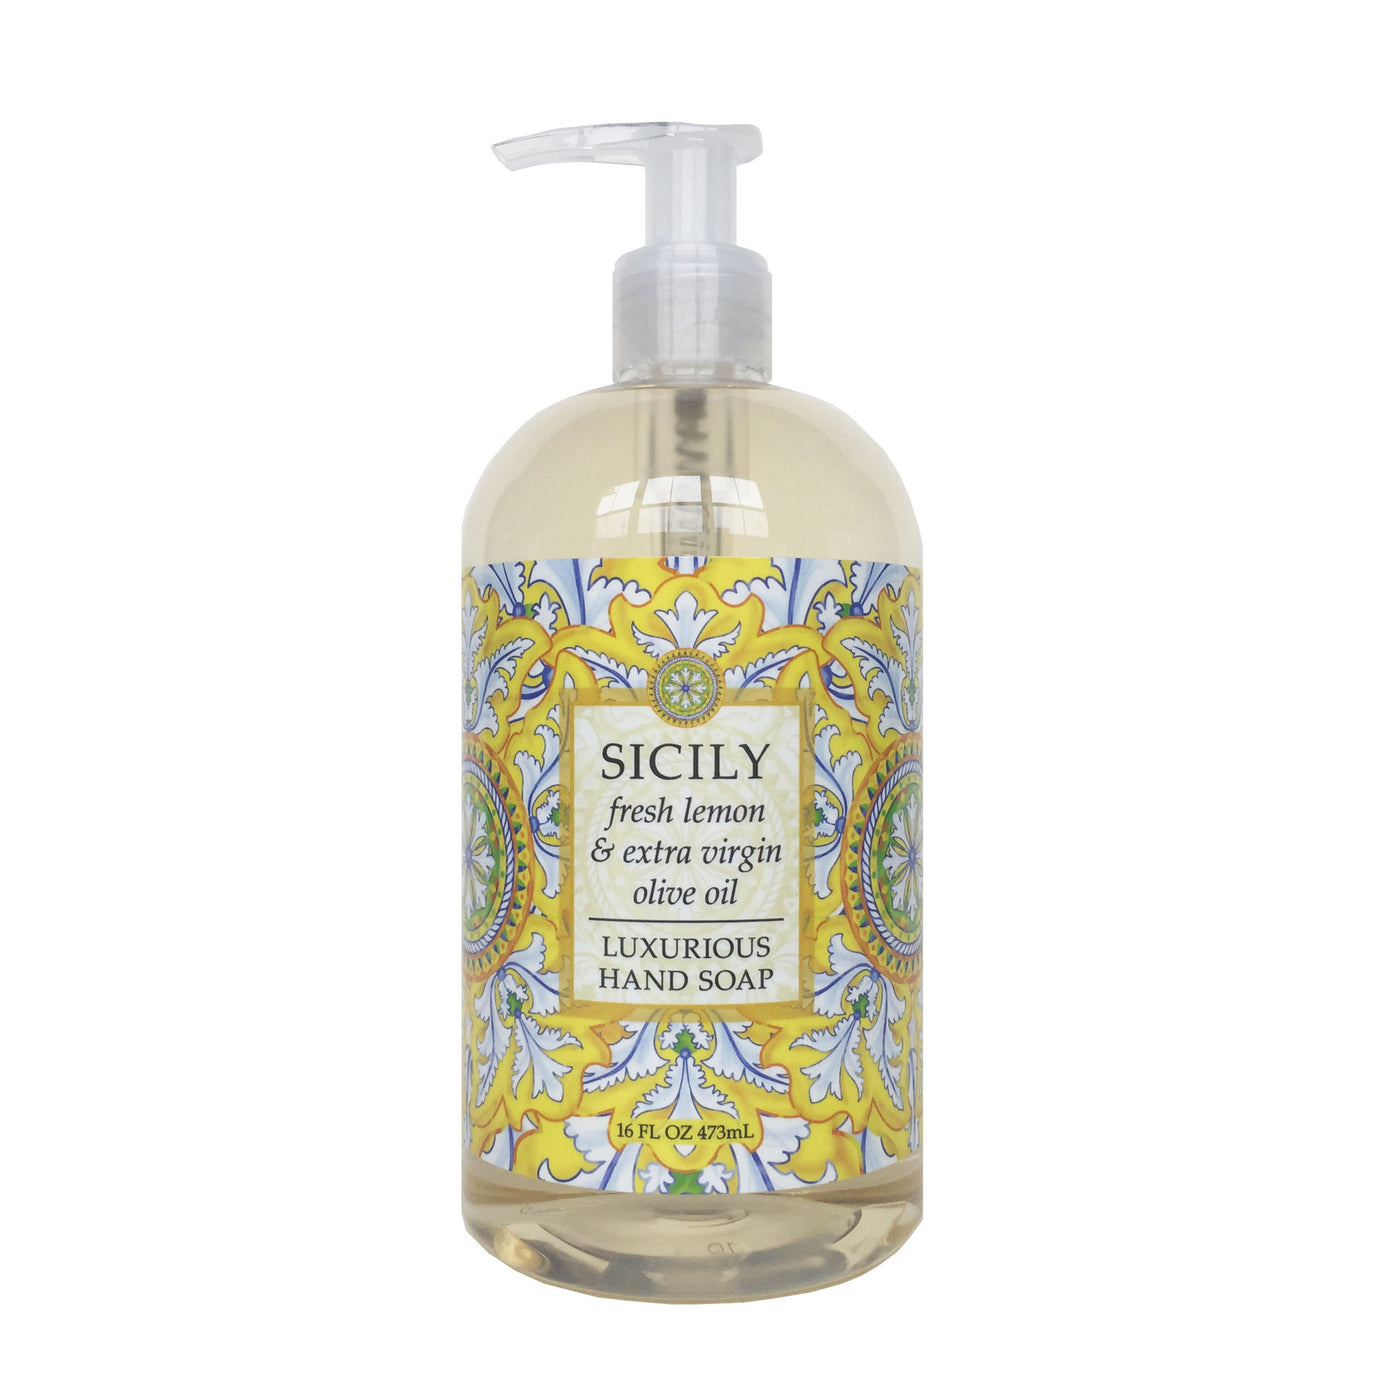 Destination Hand Soap - Sicily by Greenwich Bay Trading Company | zillymonkey